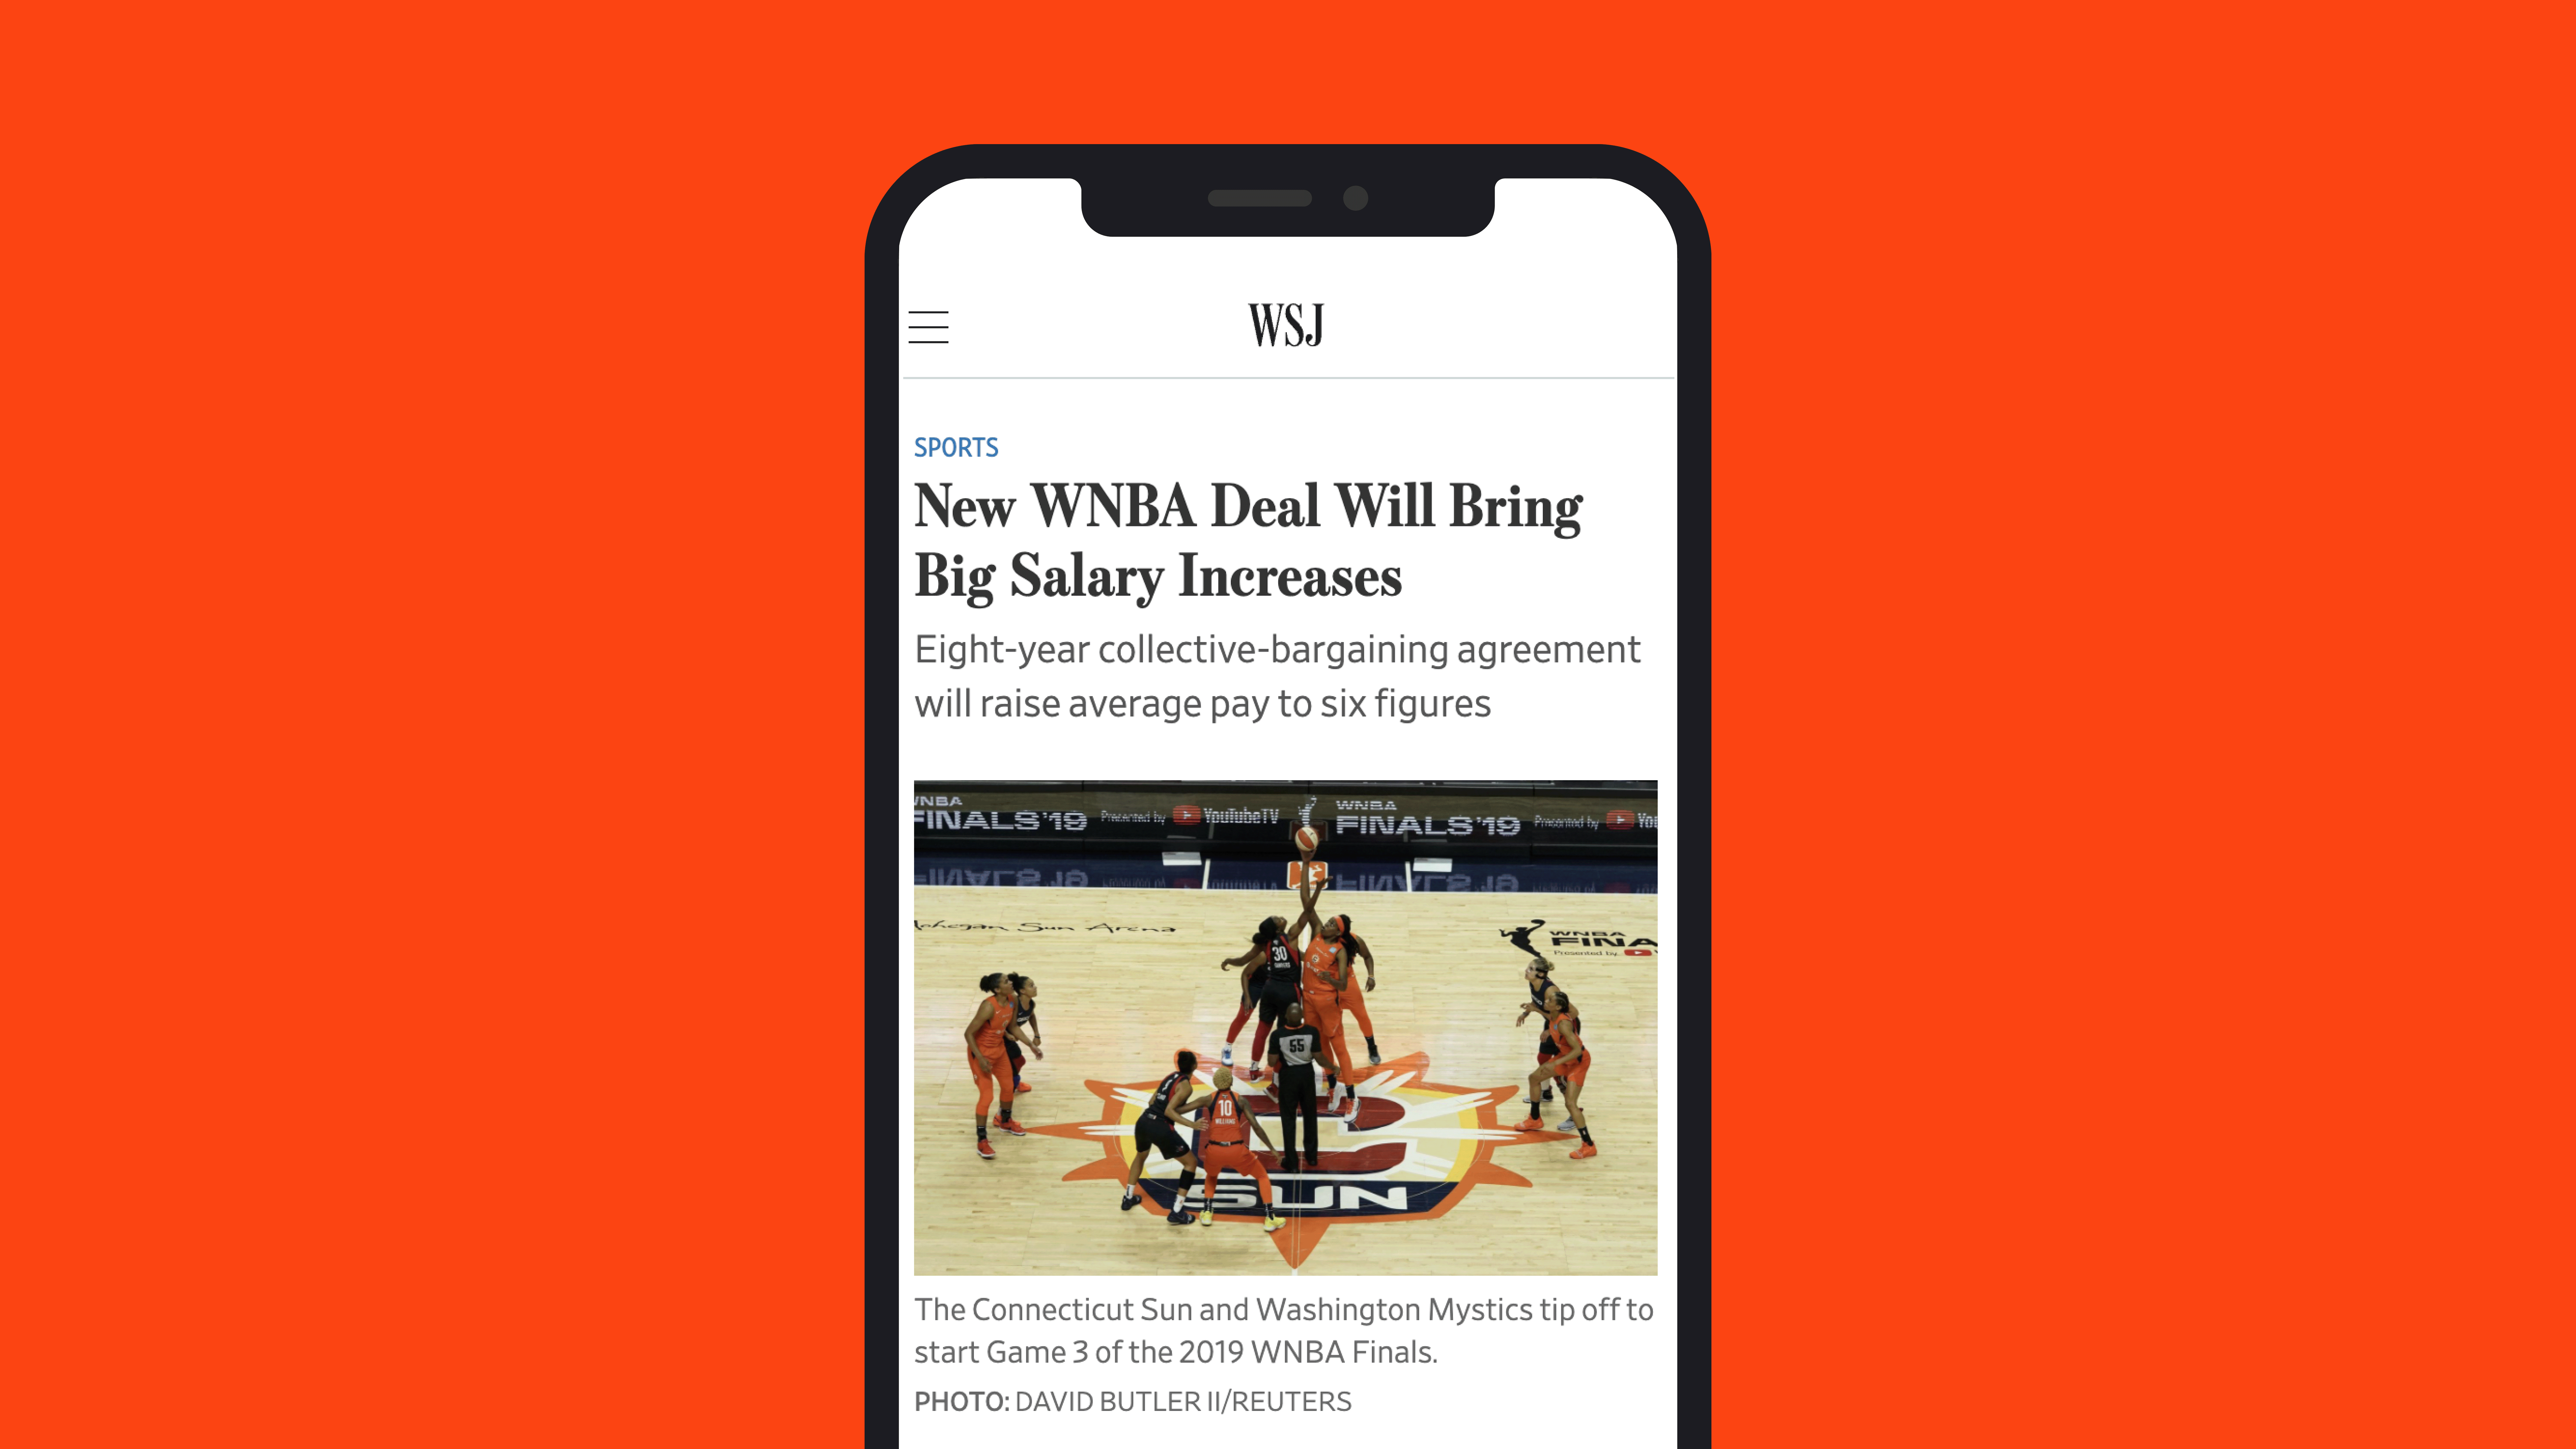 WNBA press release articles as displayed on iphone